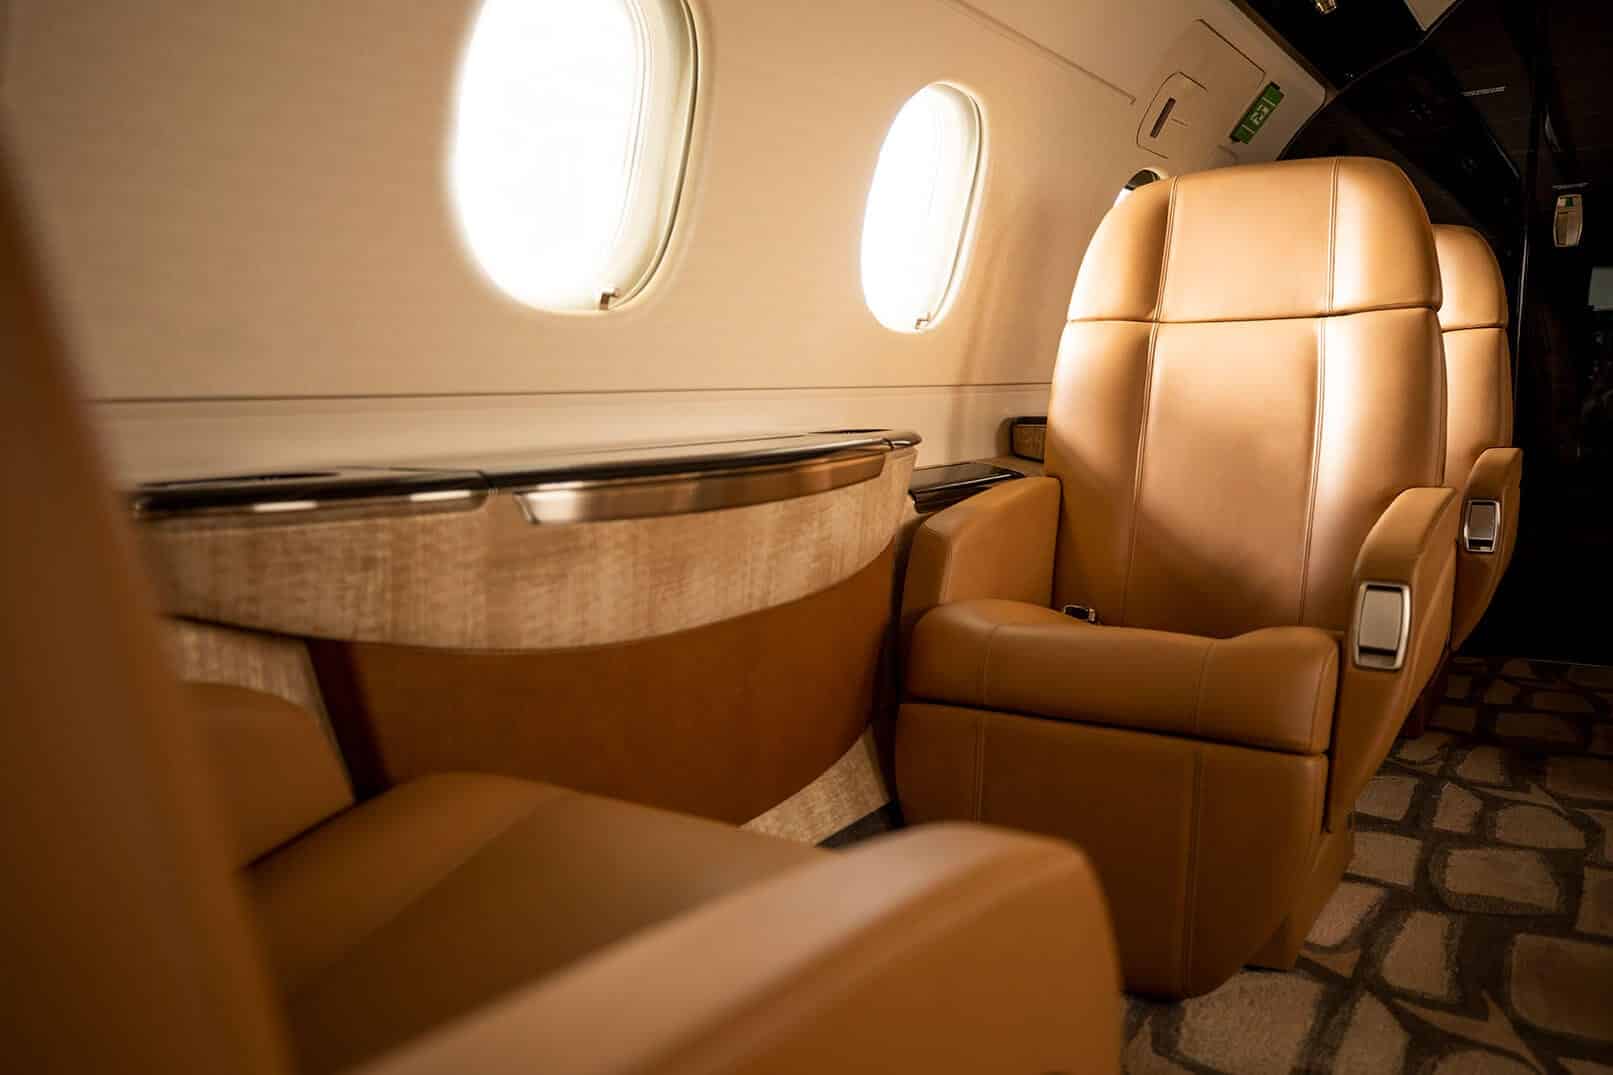 Flexjet, private jet, Legacy 450, jet interior, midsize, super midsize, mid cabin, Dakota, Embraer, LXi Cabin Collection, seats, leather seating, captains chairs